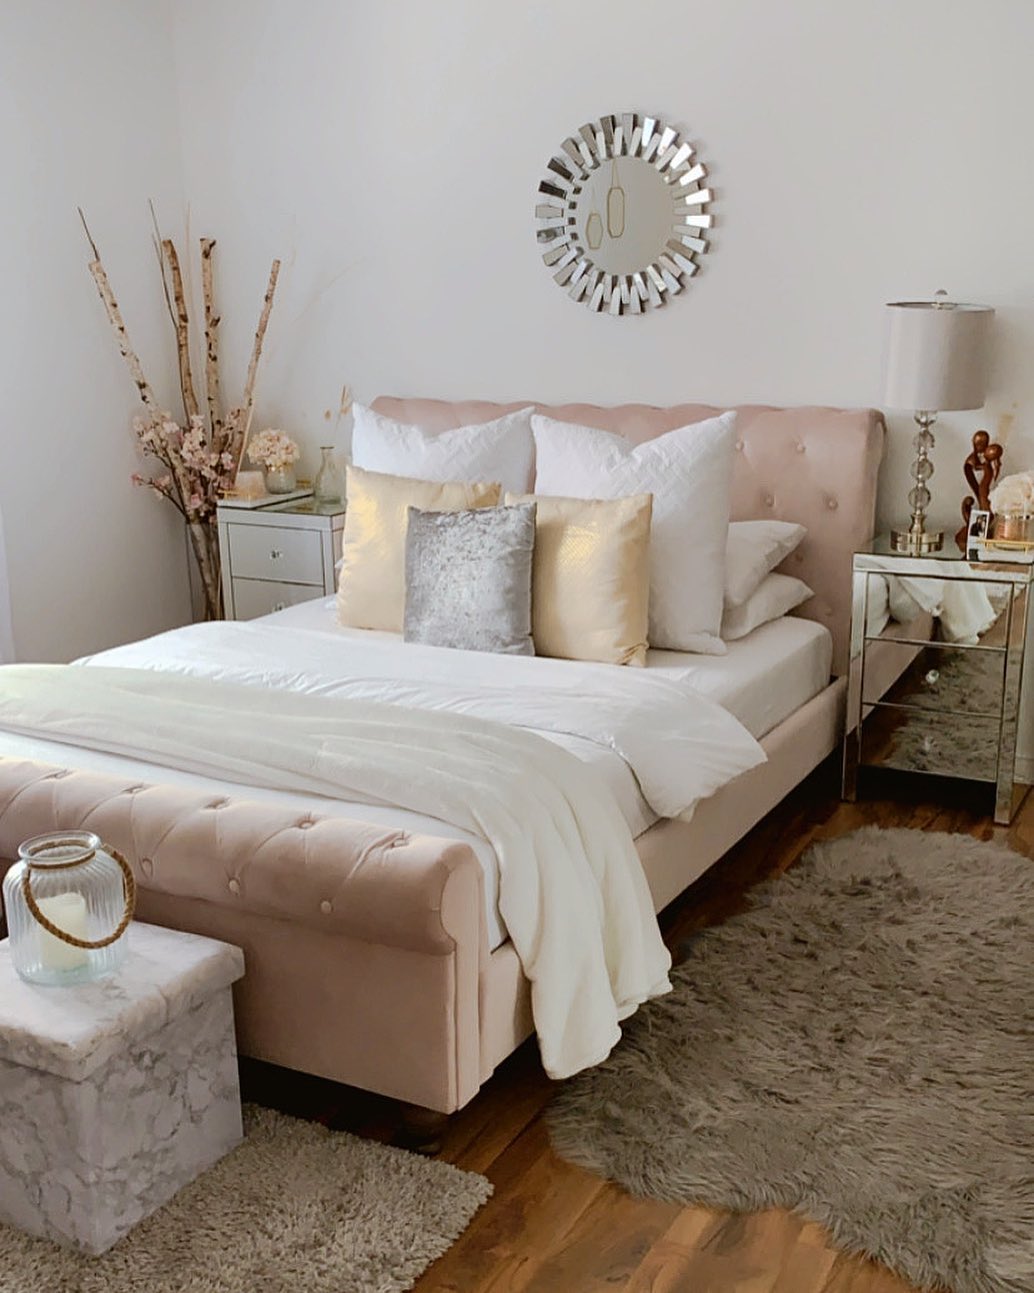 Pink upholstered tufted sleigh bed. Photo by Instagram user @budget.homedecor